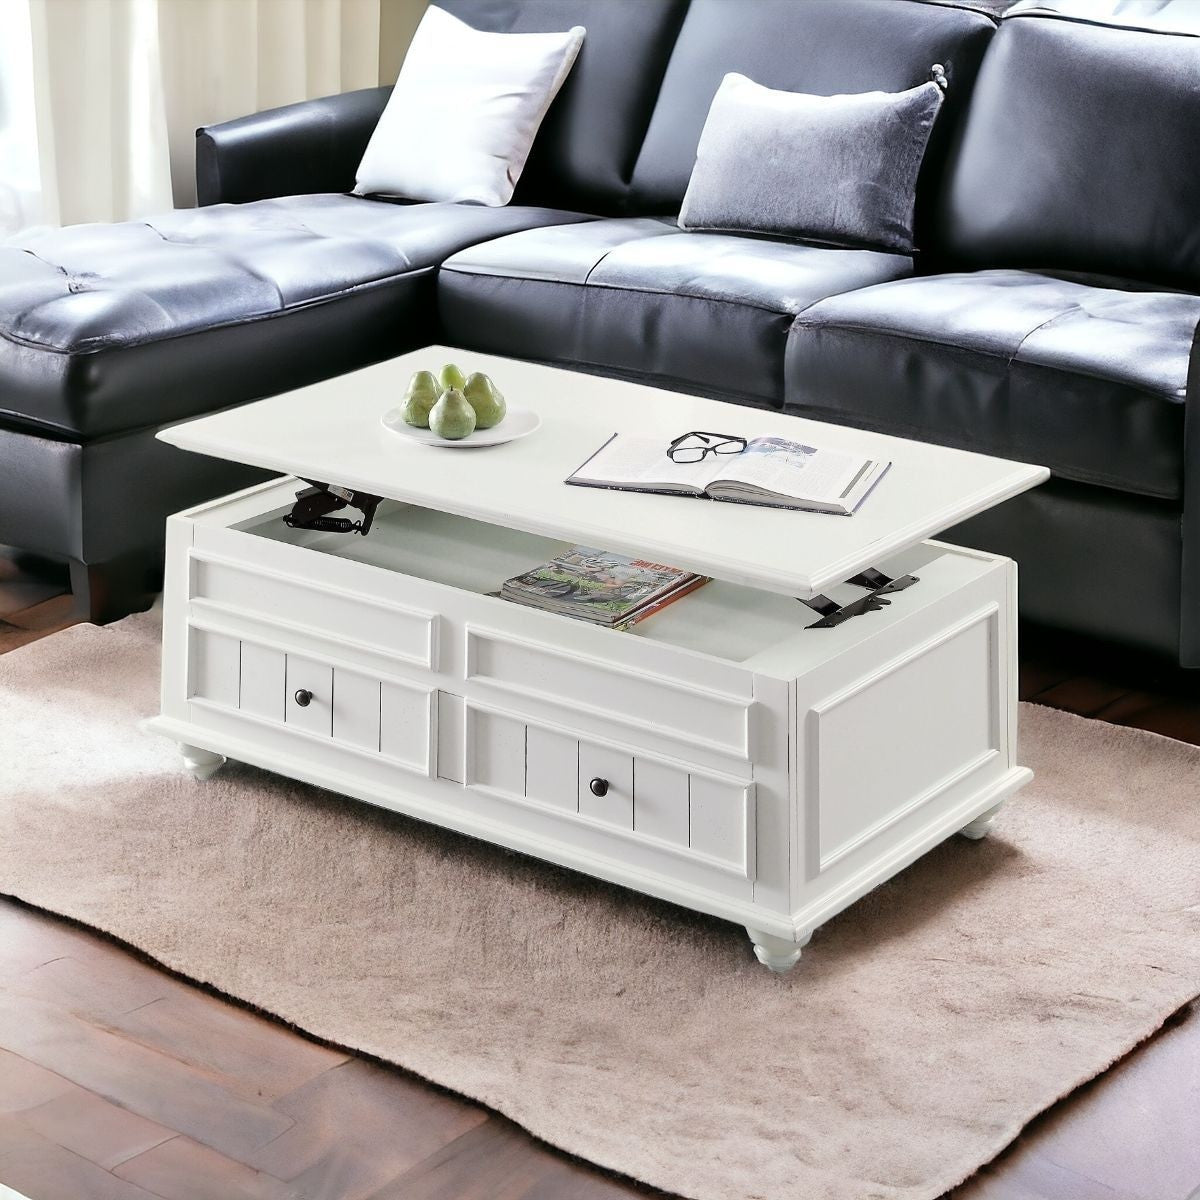 48" White Solid And Manufactured Wood Lift Top Coffee Table With Two Drawers